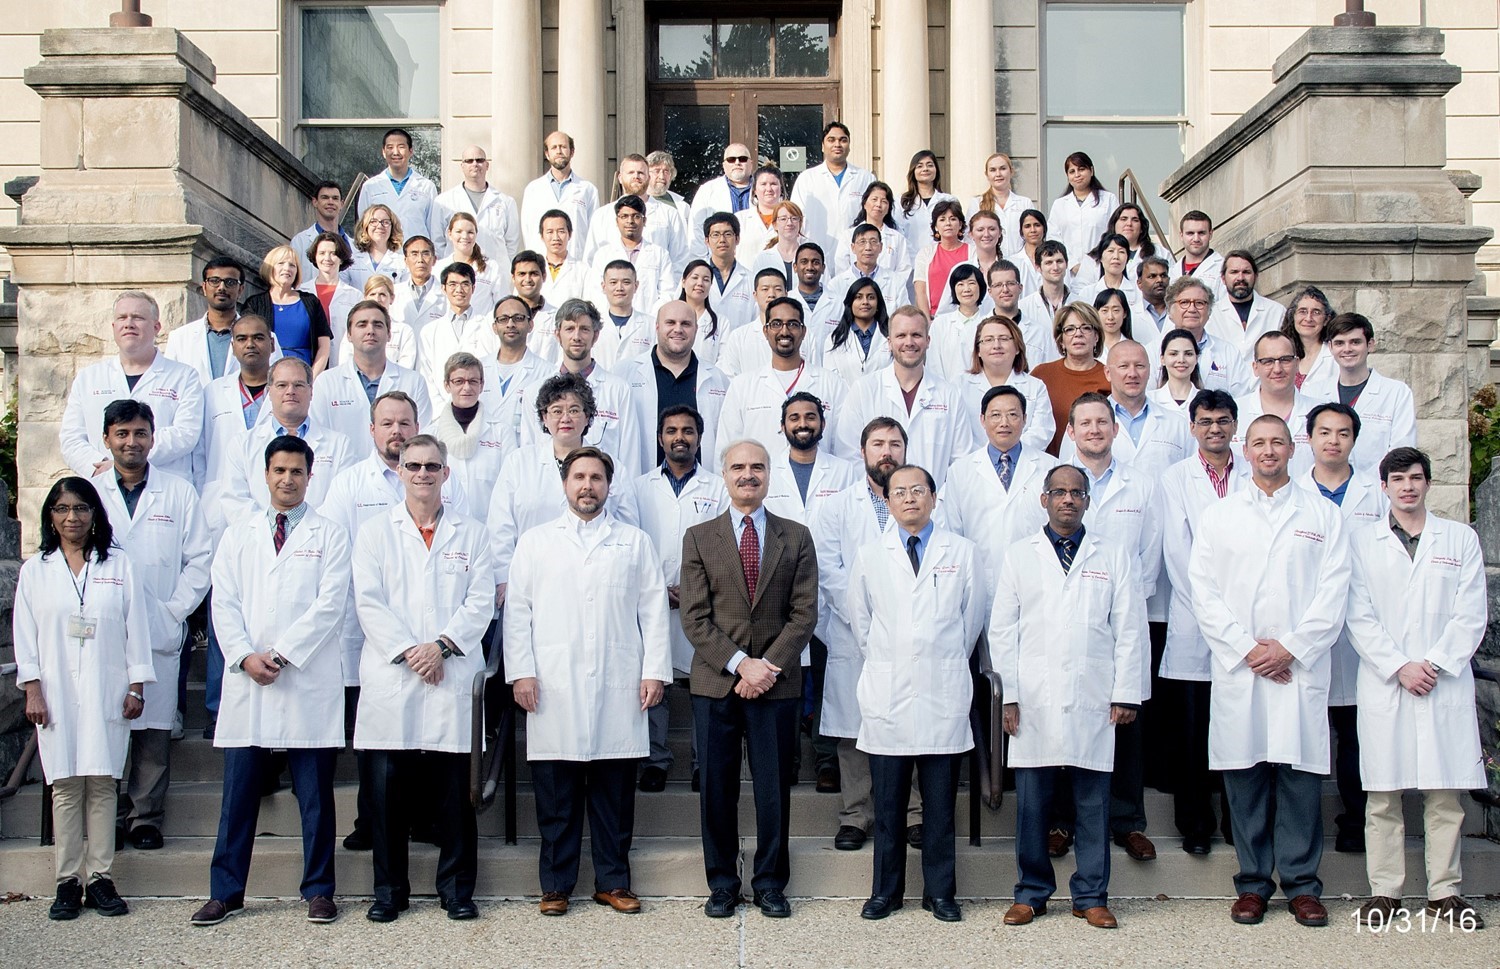 The research team on the Program Project Grant is shown on the steps of the Abell Administration Center at the UofL Health Sciences Center in October 2016, with principal investigator Roberto Bolli, M.D., at front center.